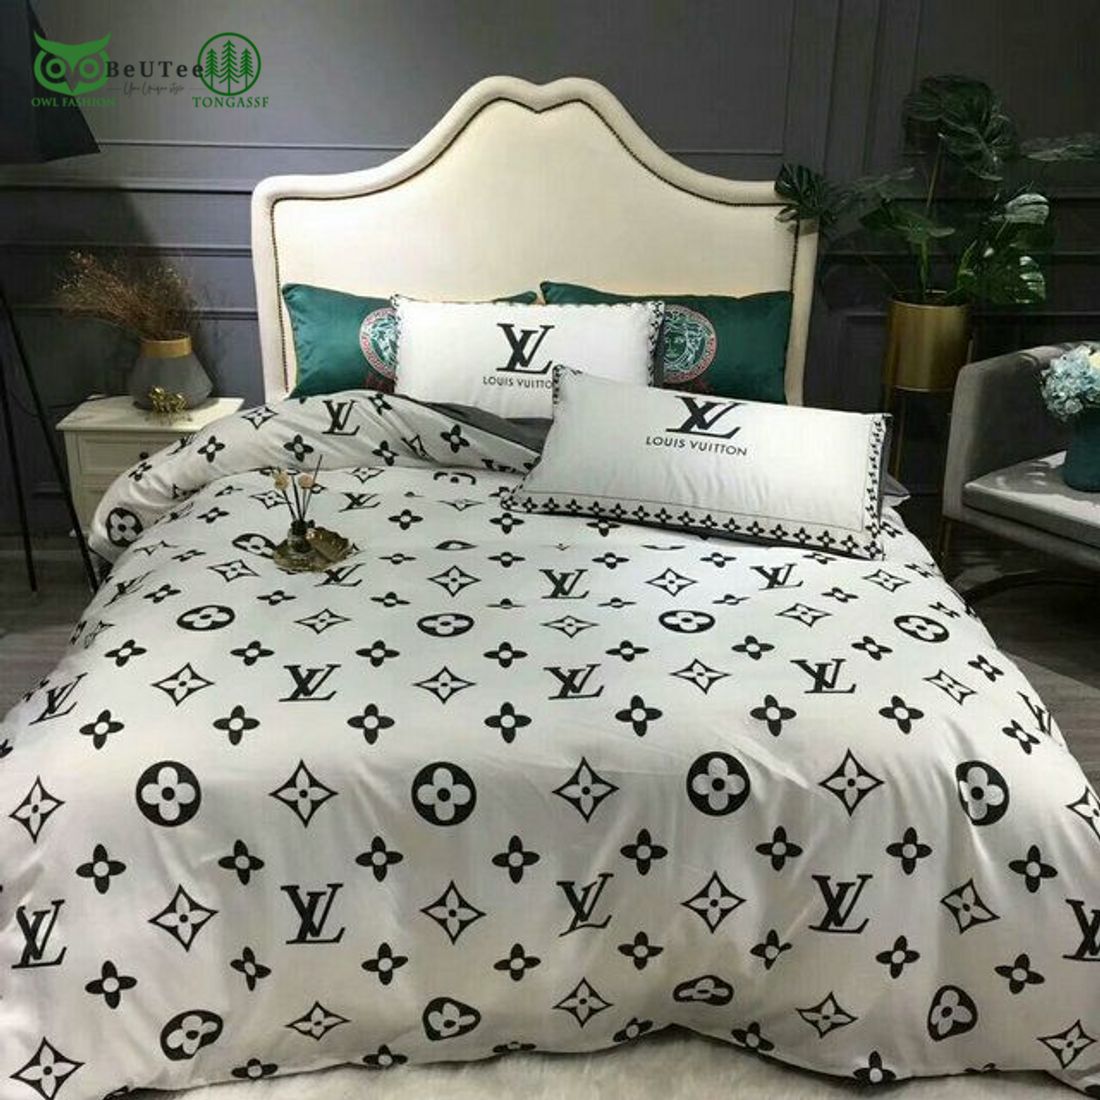 Tongassf on X: 🔥SPECIAL🔥 ⚡ LV Louis Vuitton Brand White Bedding Set  Duvet Cover ⚡ ➡️Get it now:  #tongassf  #tongassfstore #tongassffashion #beddingset #LouisVuitton   / X